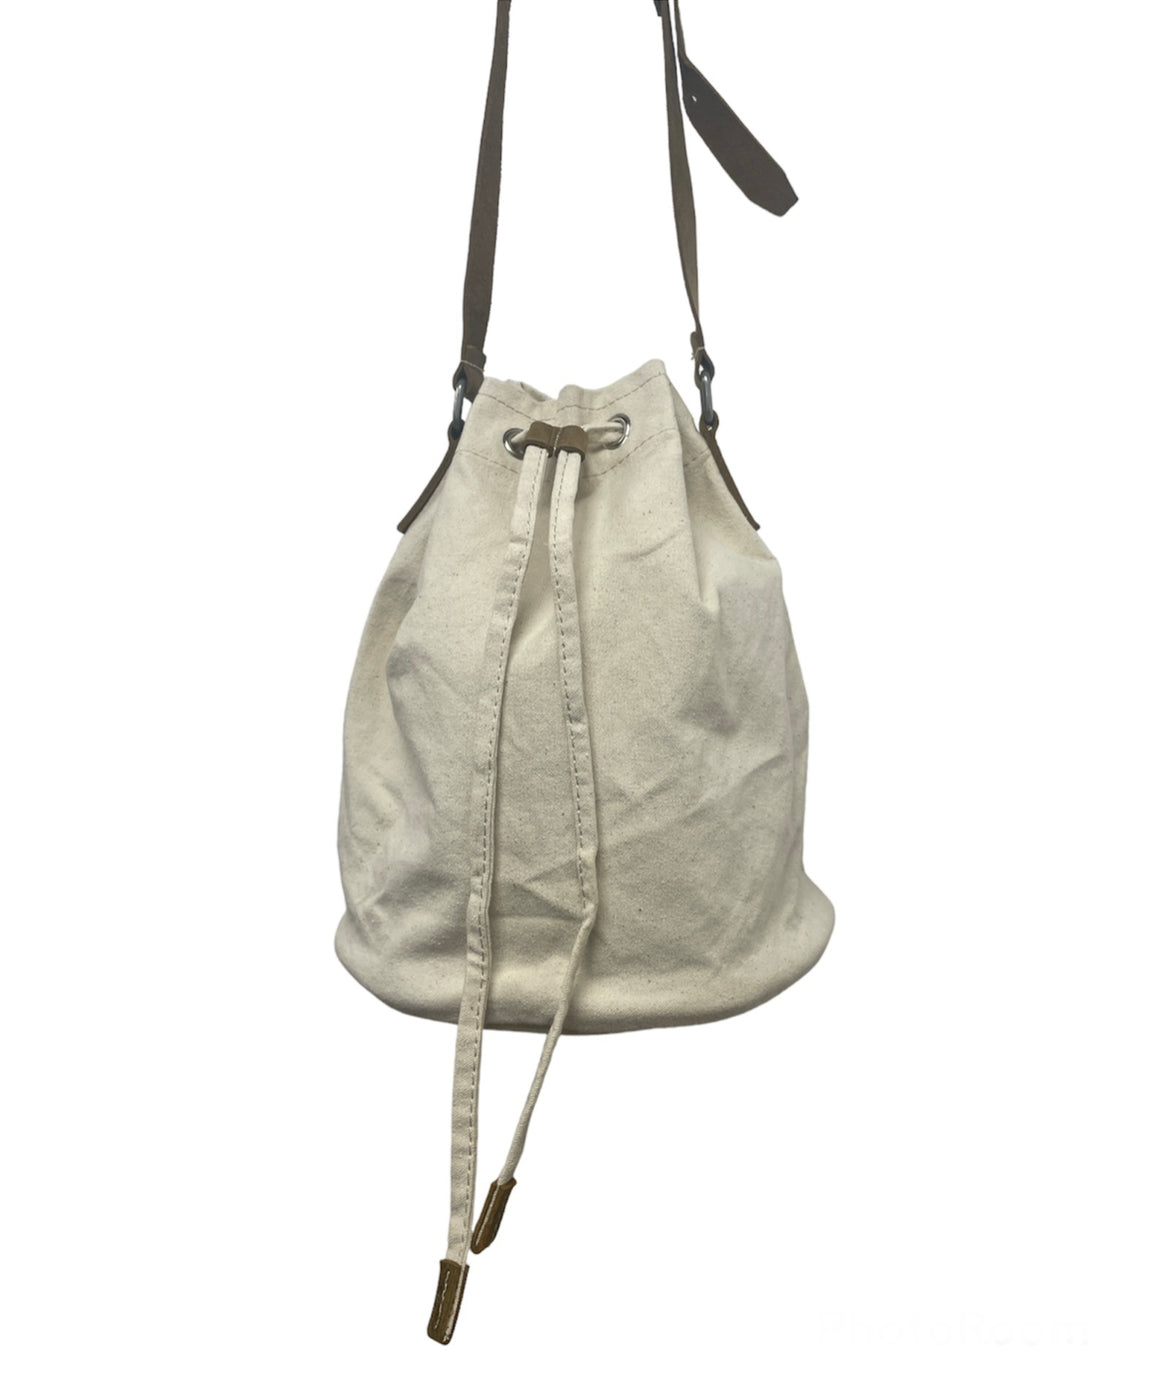 Canvas Bucket Bag with Leather Straps